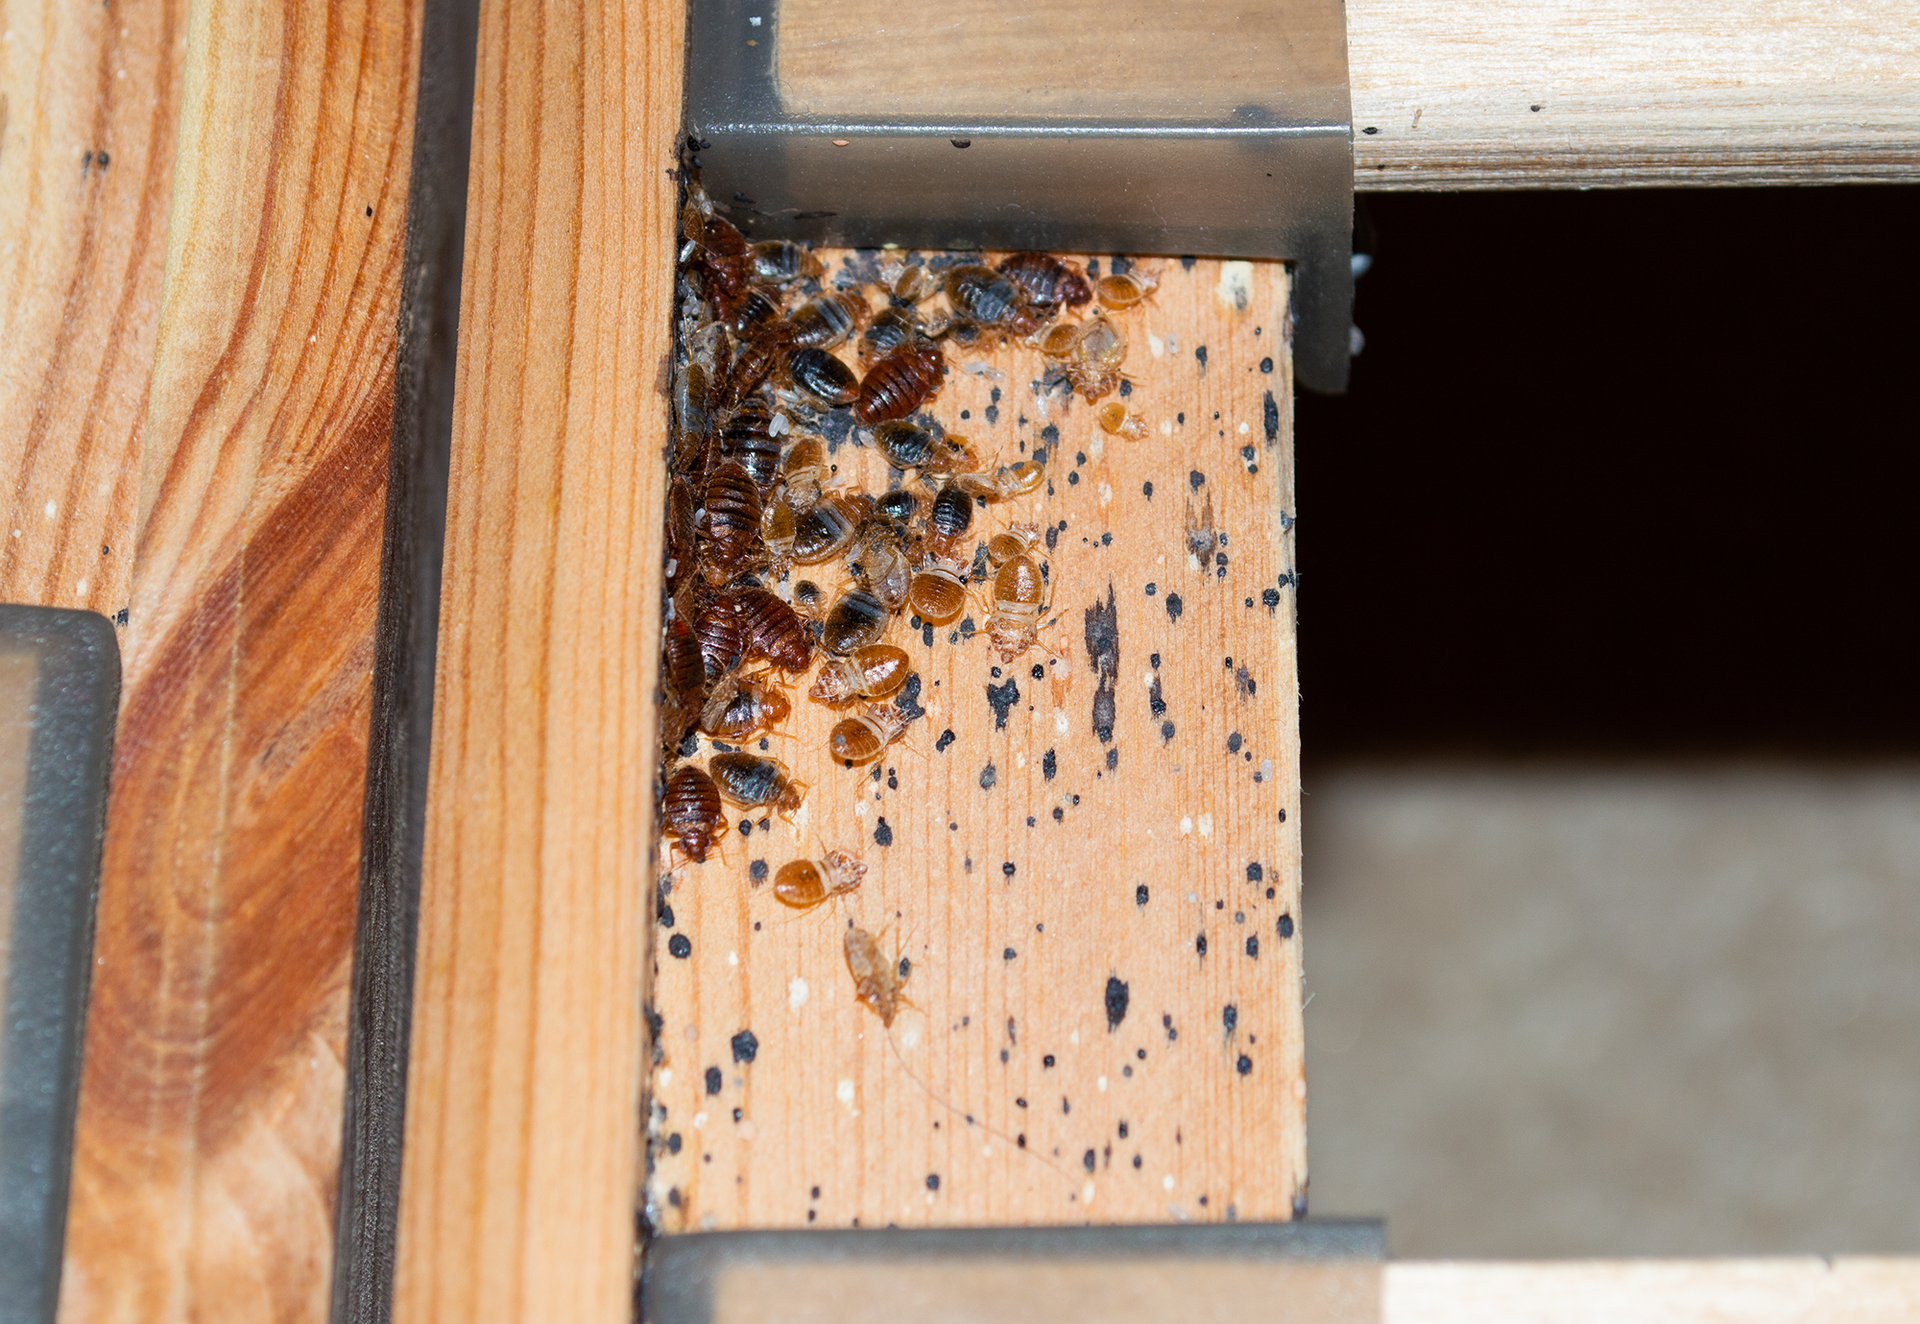 Bed bugs are crawling on a wooden bed frame.